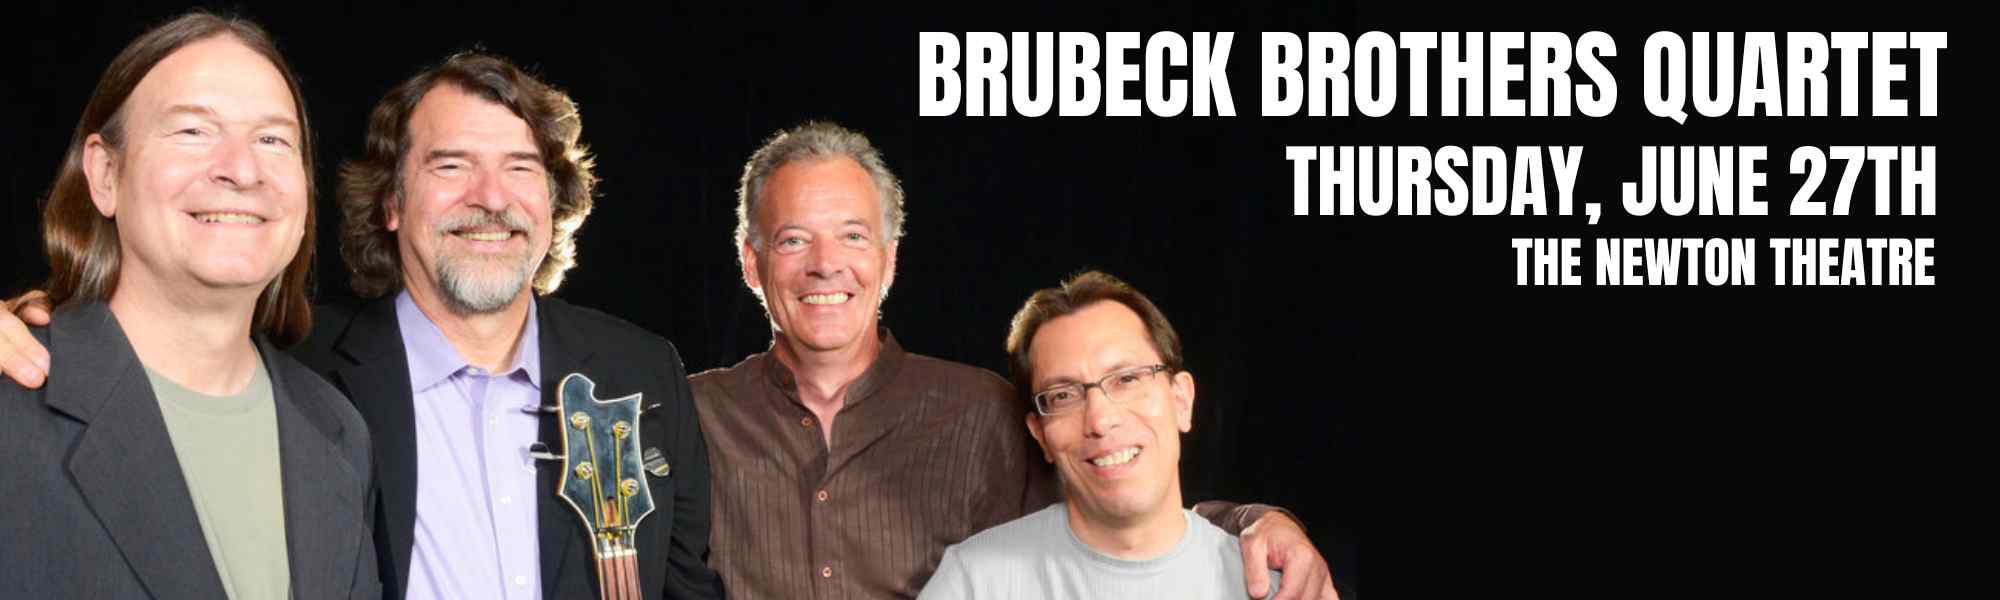 Brubeck Brothers Quartet plays at The Newton Theatre on Thursday, June 27th.